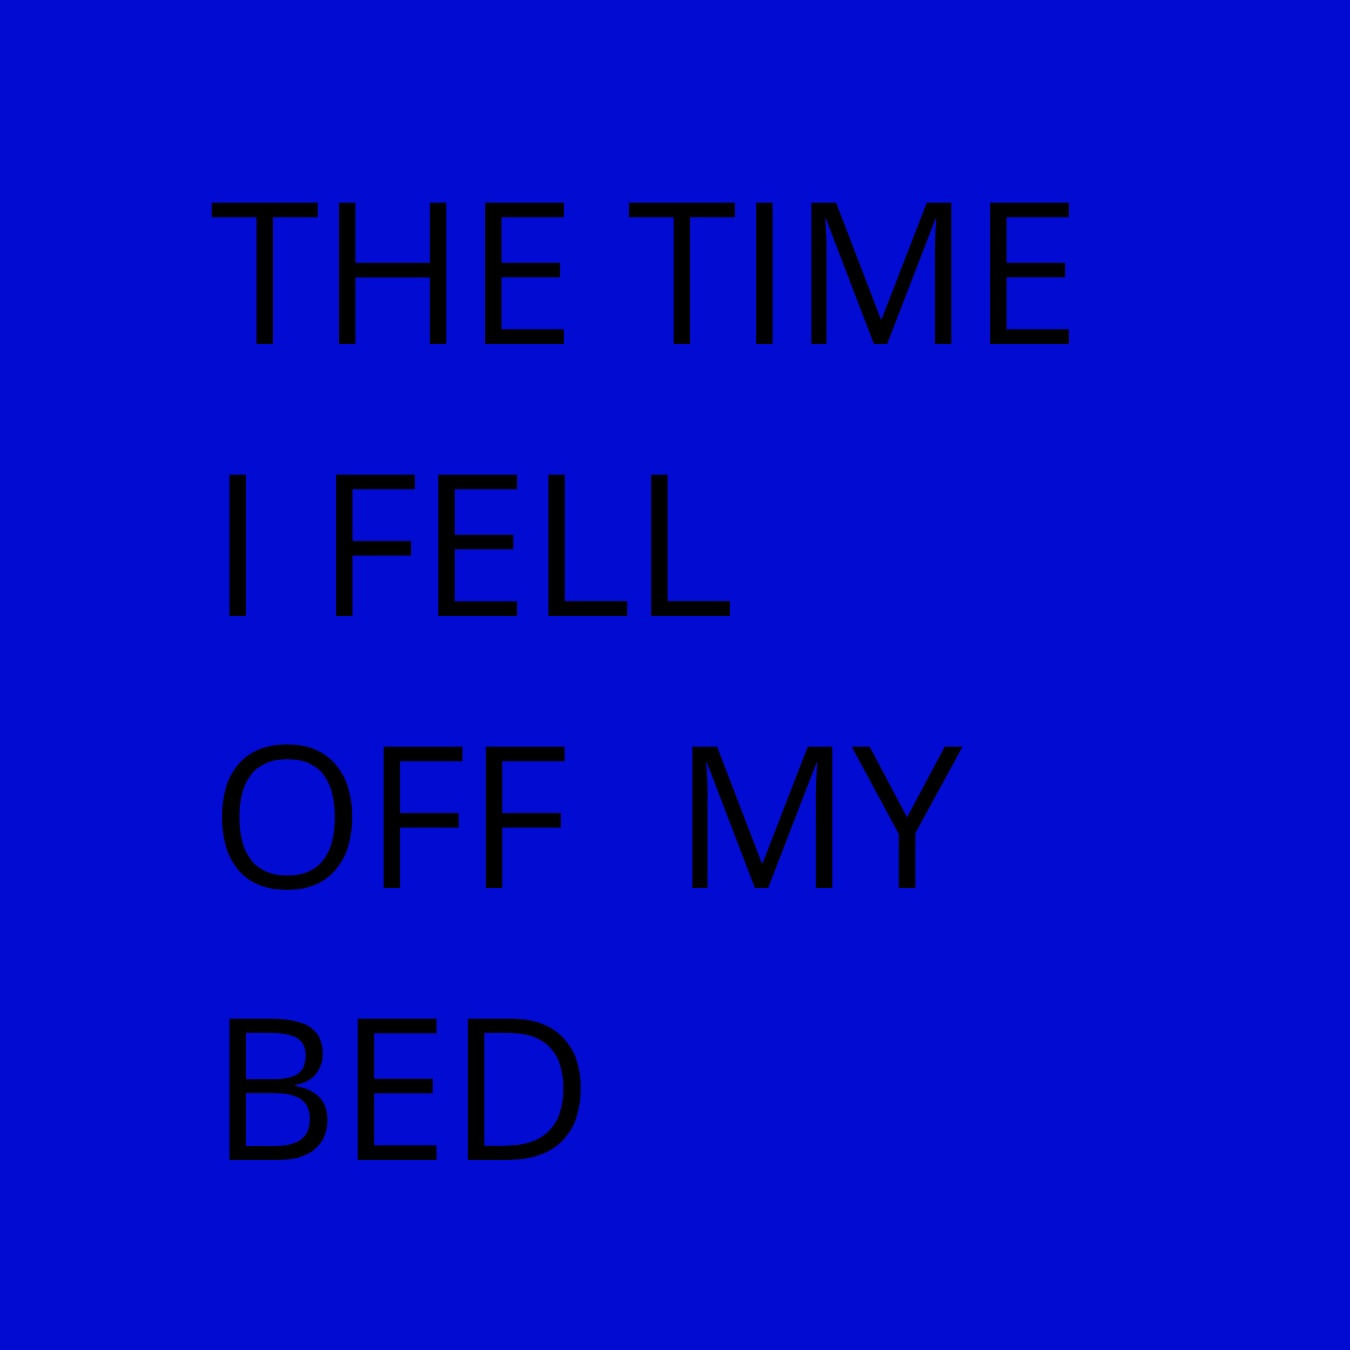 THE TIME I FELL OF MY BED by Bradley I